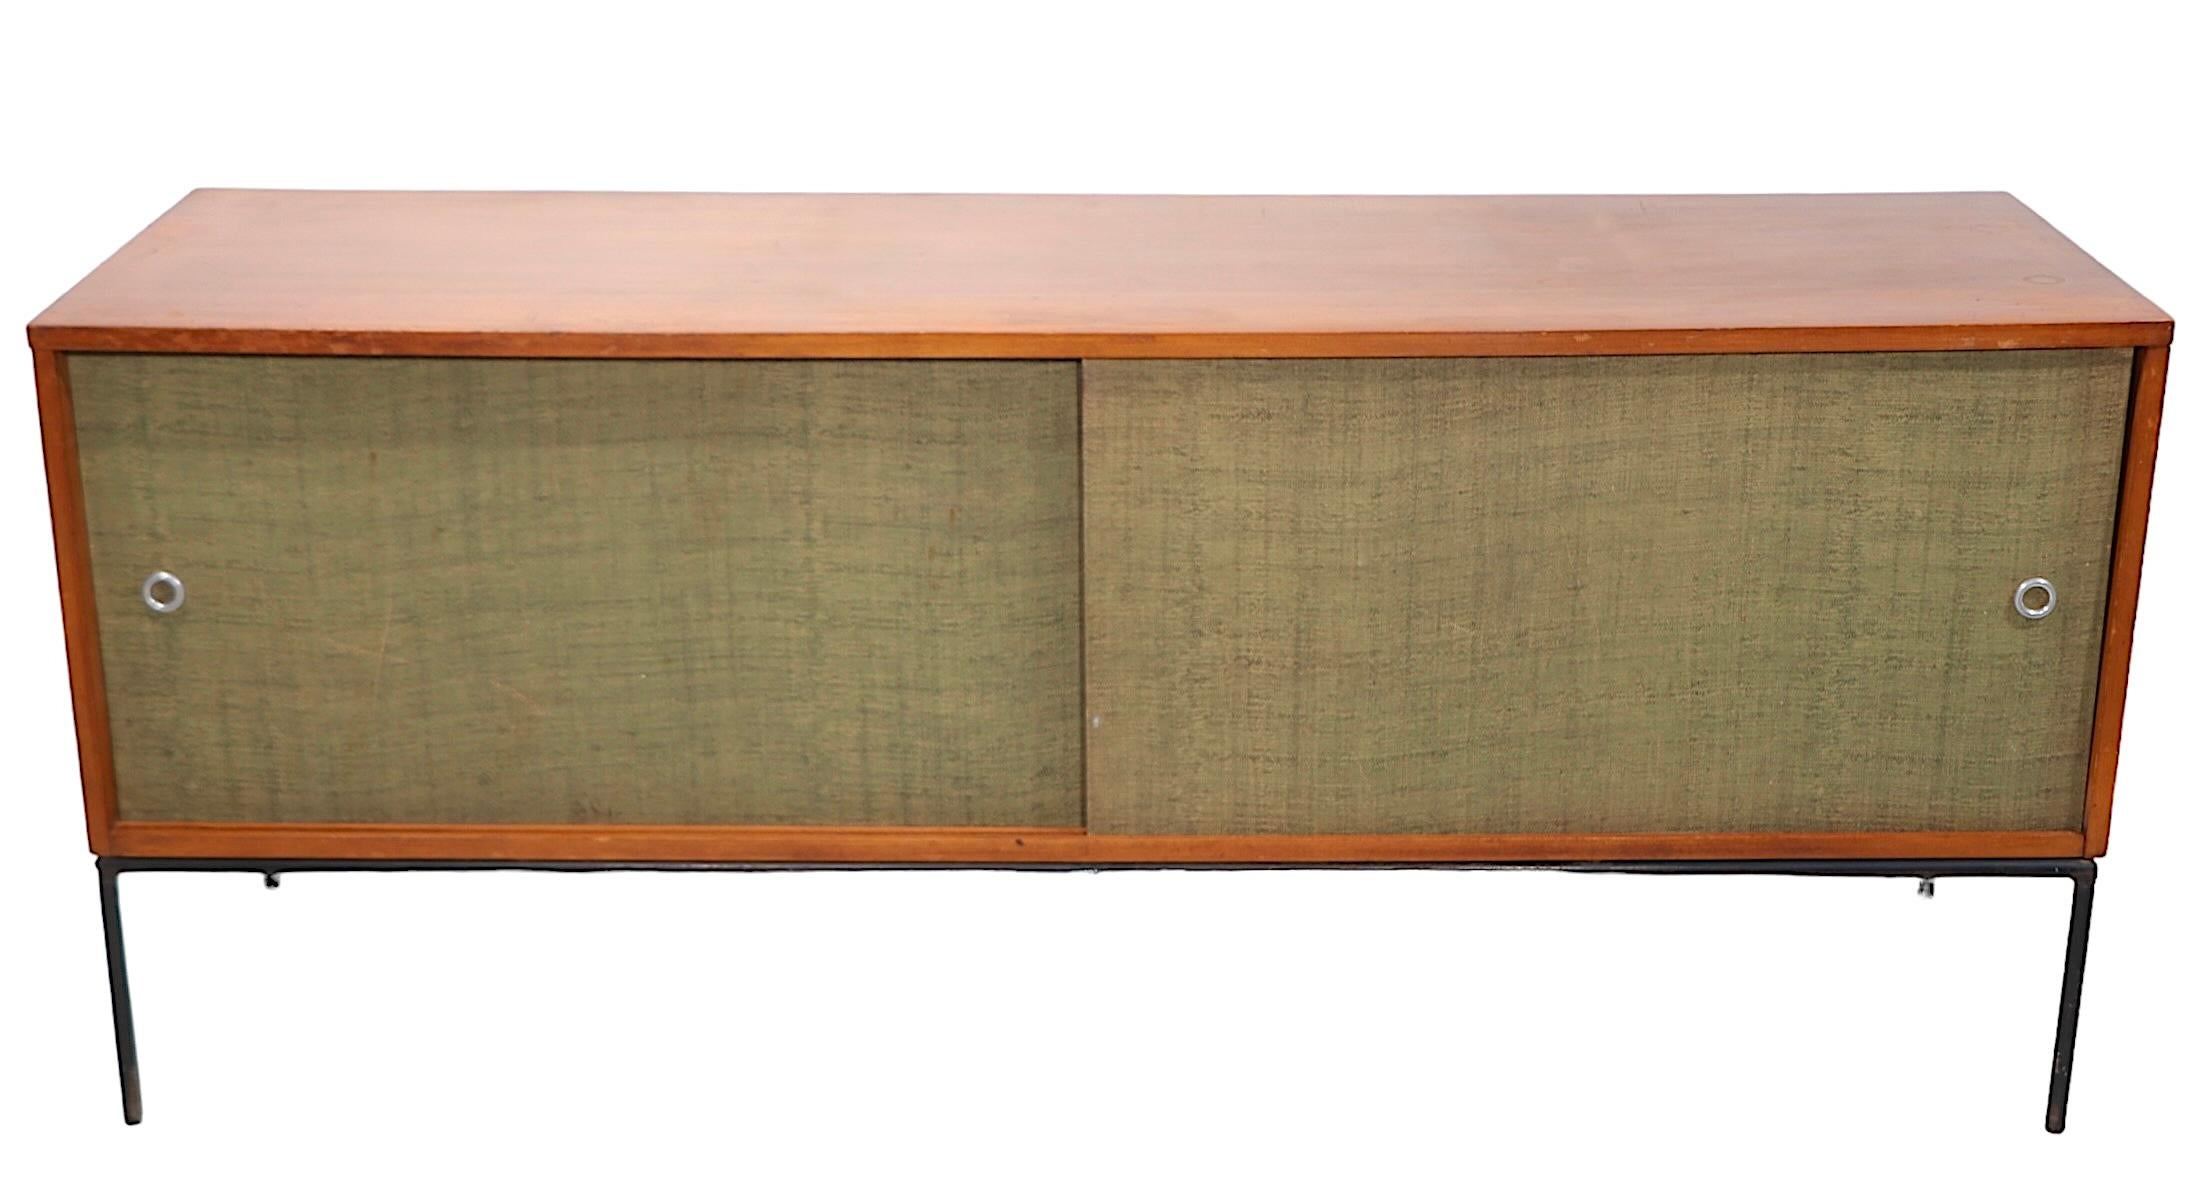  Mid Century Paul McCobb Winchendon  Planner Group Cabinet c. 1950's  For Sale 6